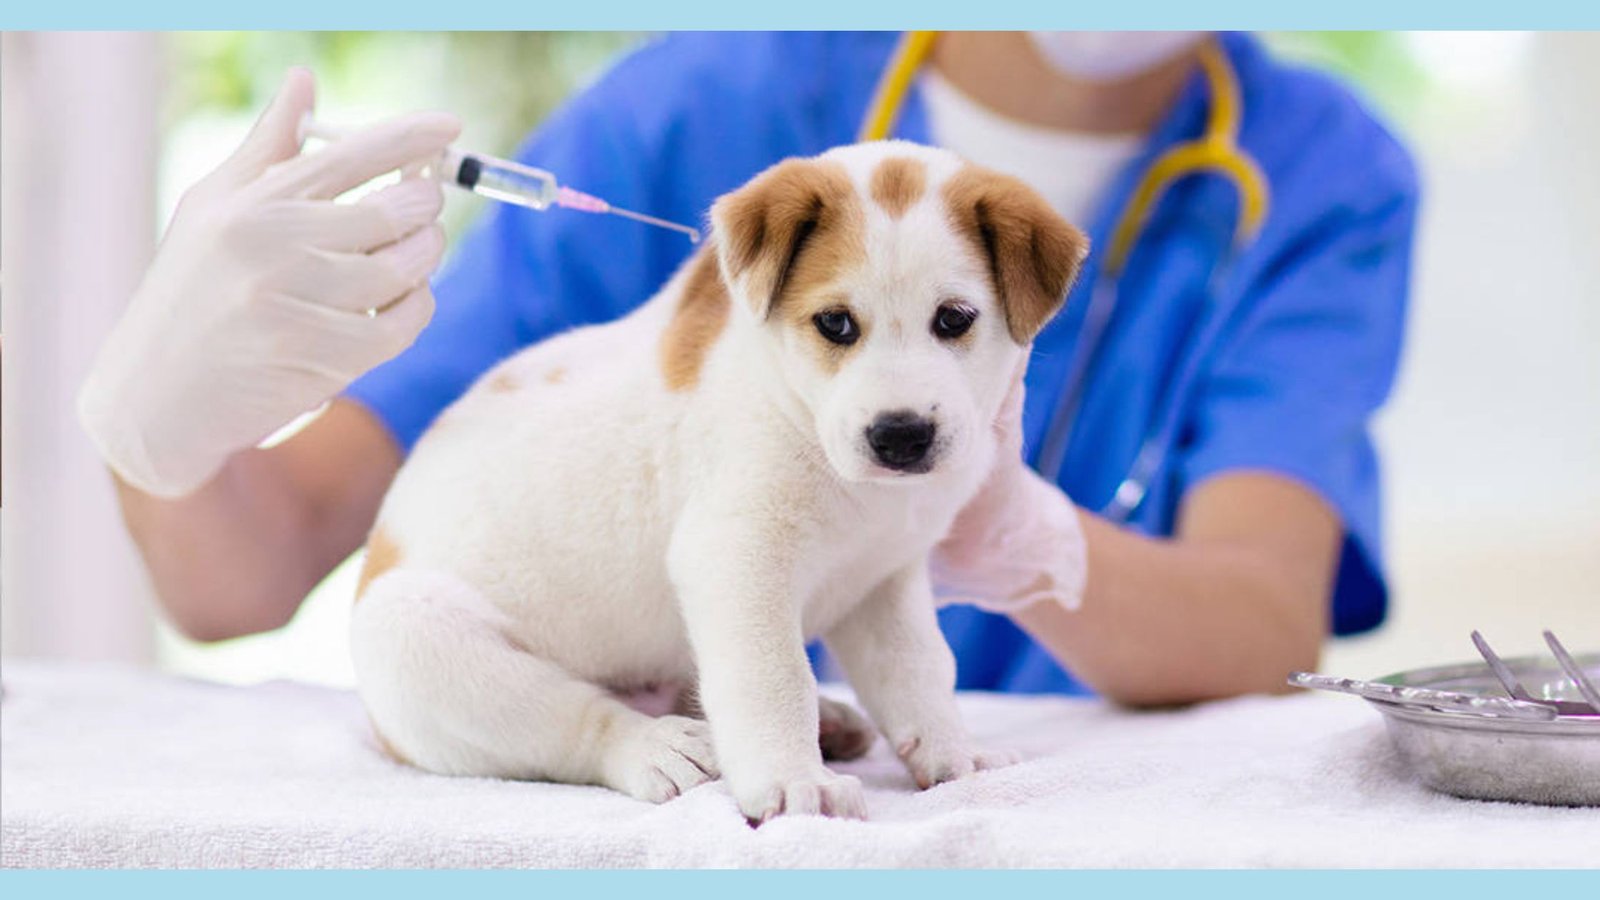 5 IN 1 VACCINE FOR DOGS